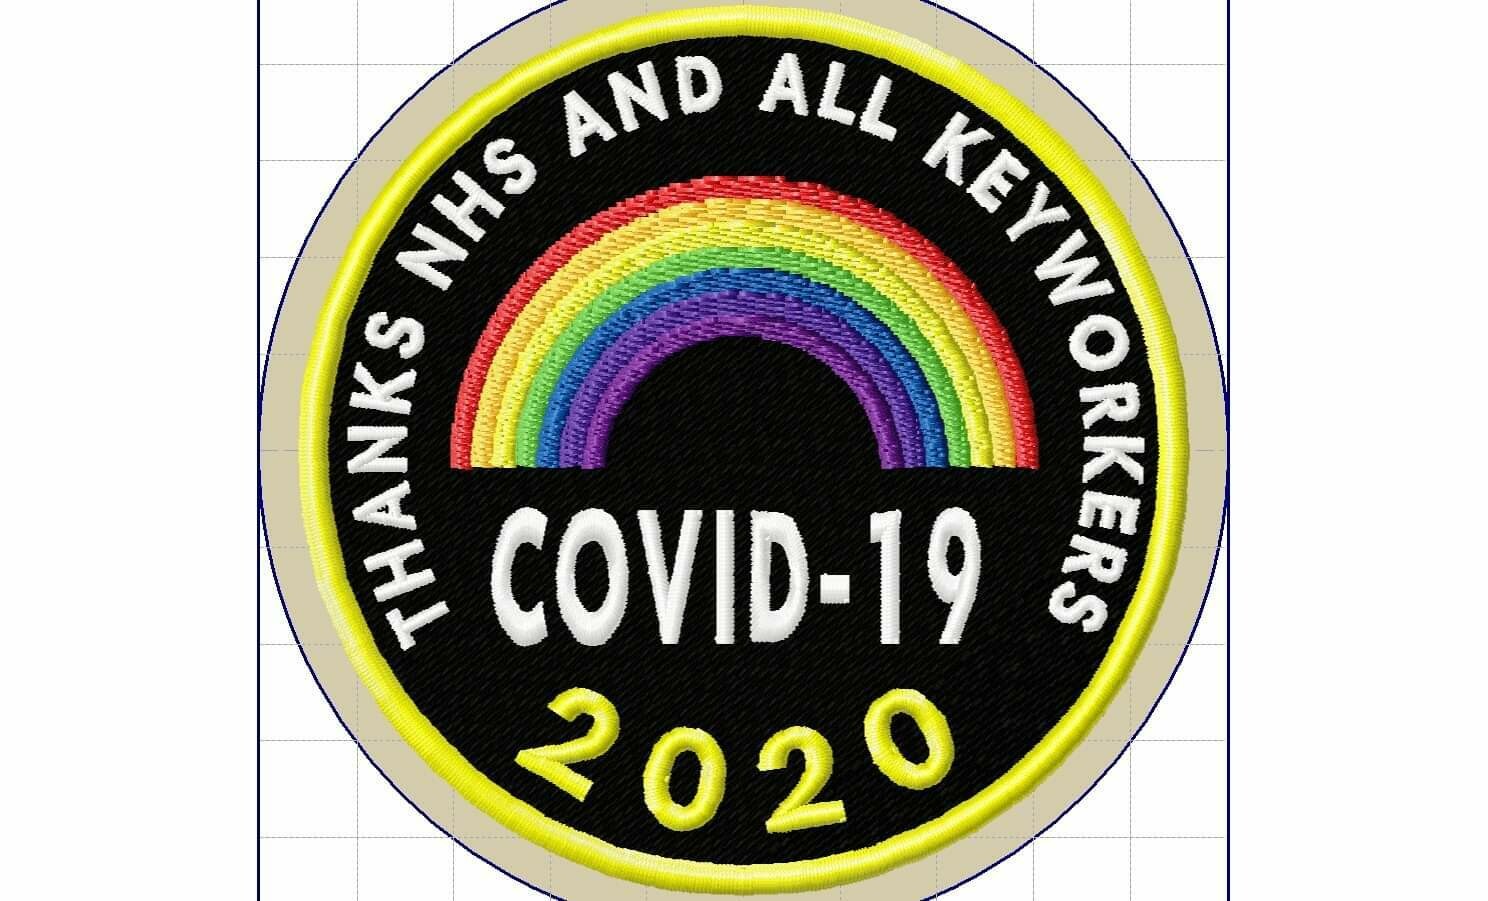 The 'Thanks NHS and All Keyworkers' Appreciation During Covid-19 Pandemic Rainbow Patch 2020